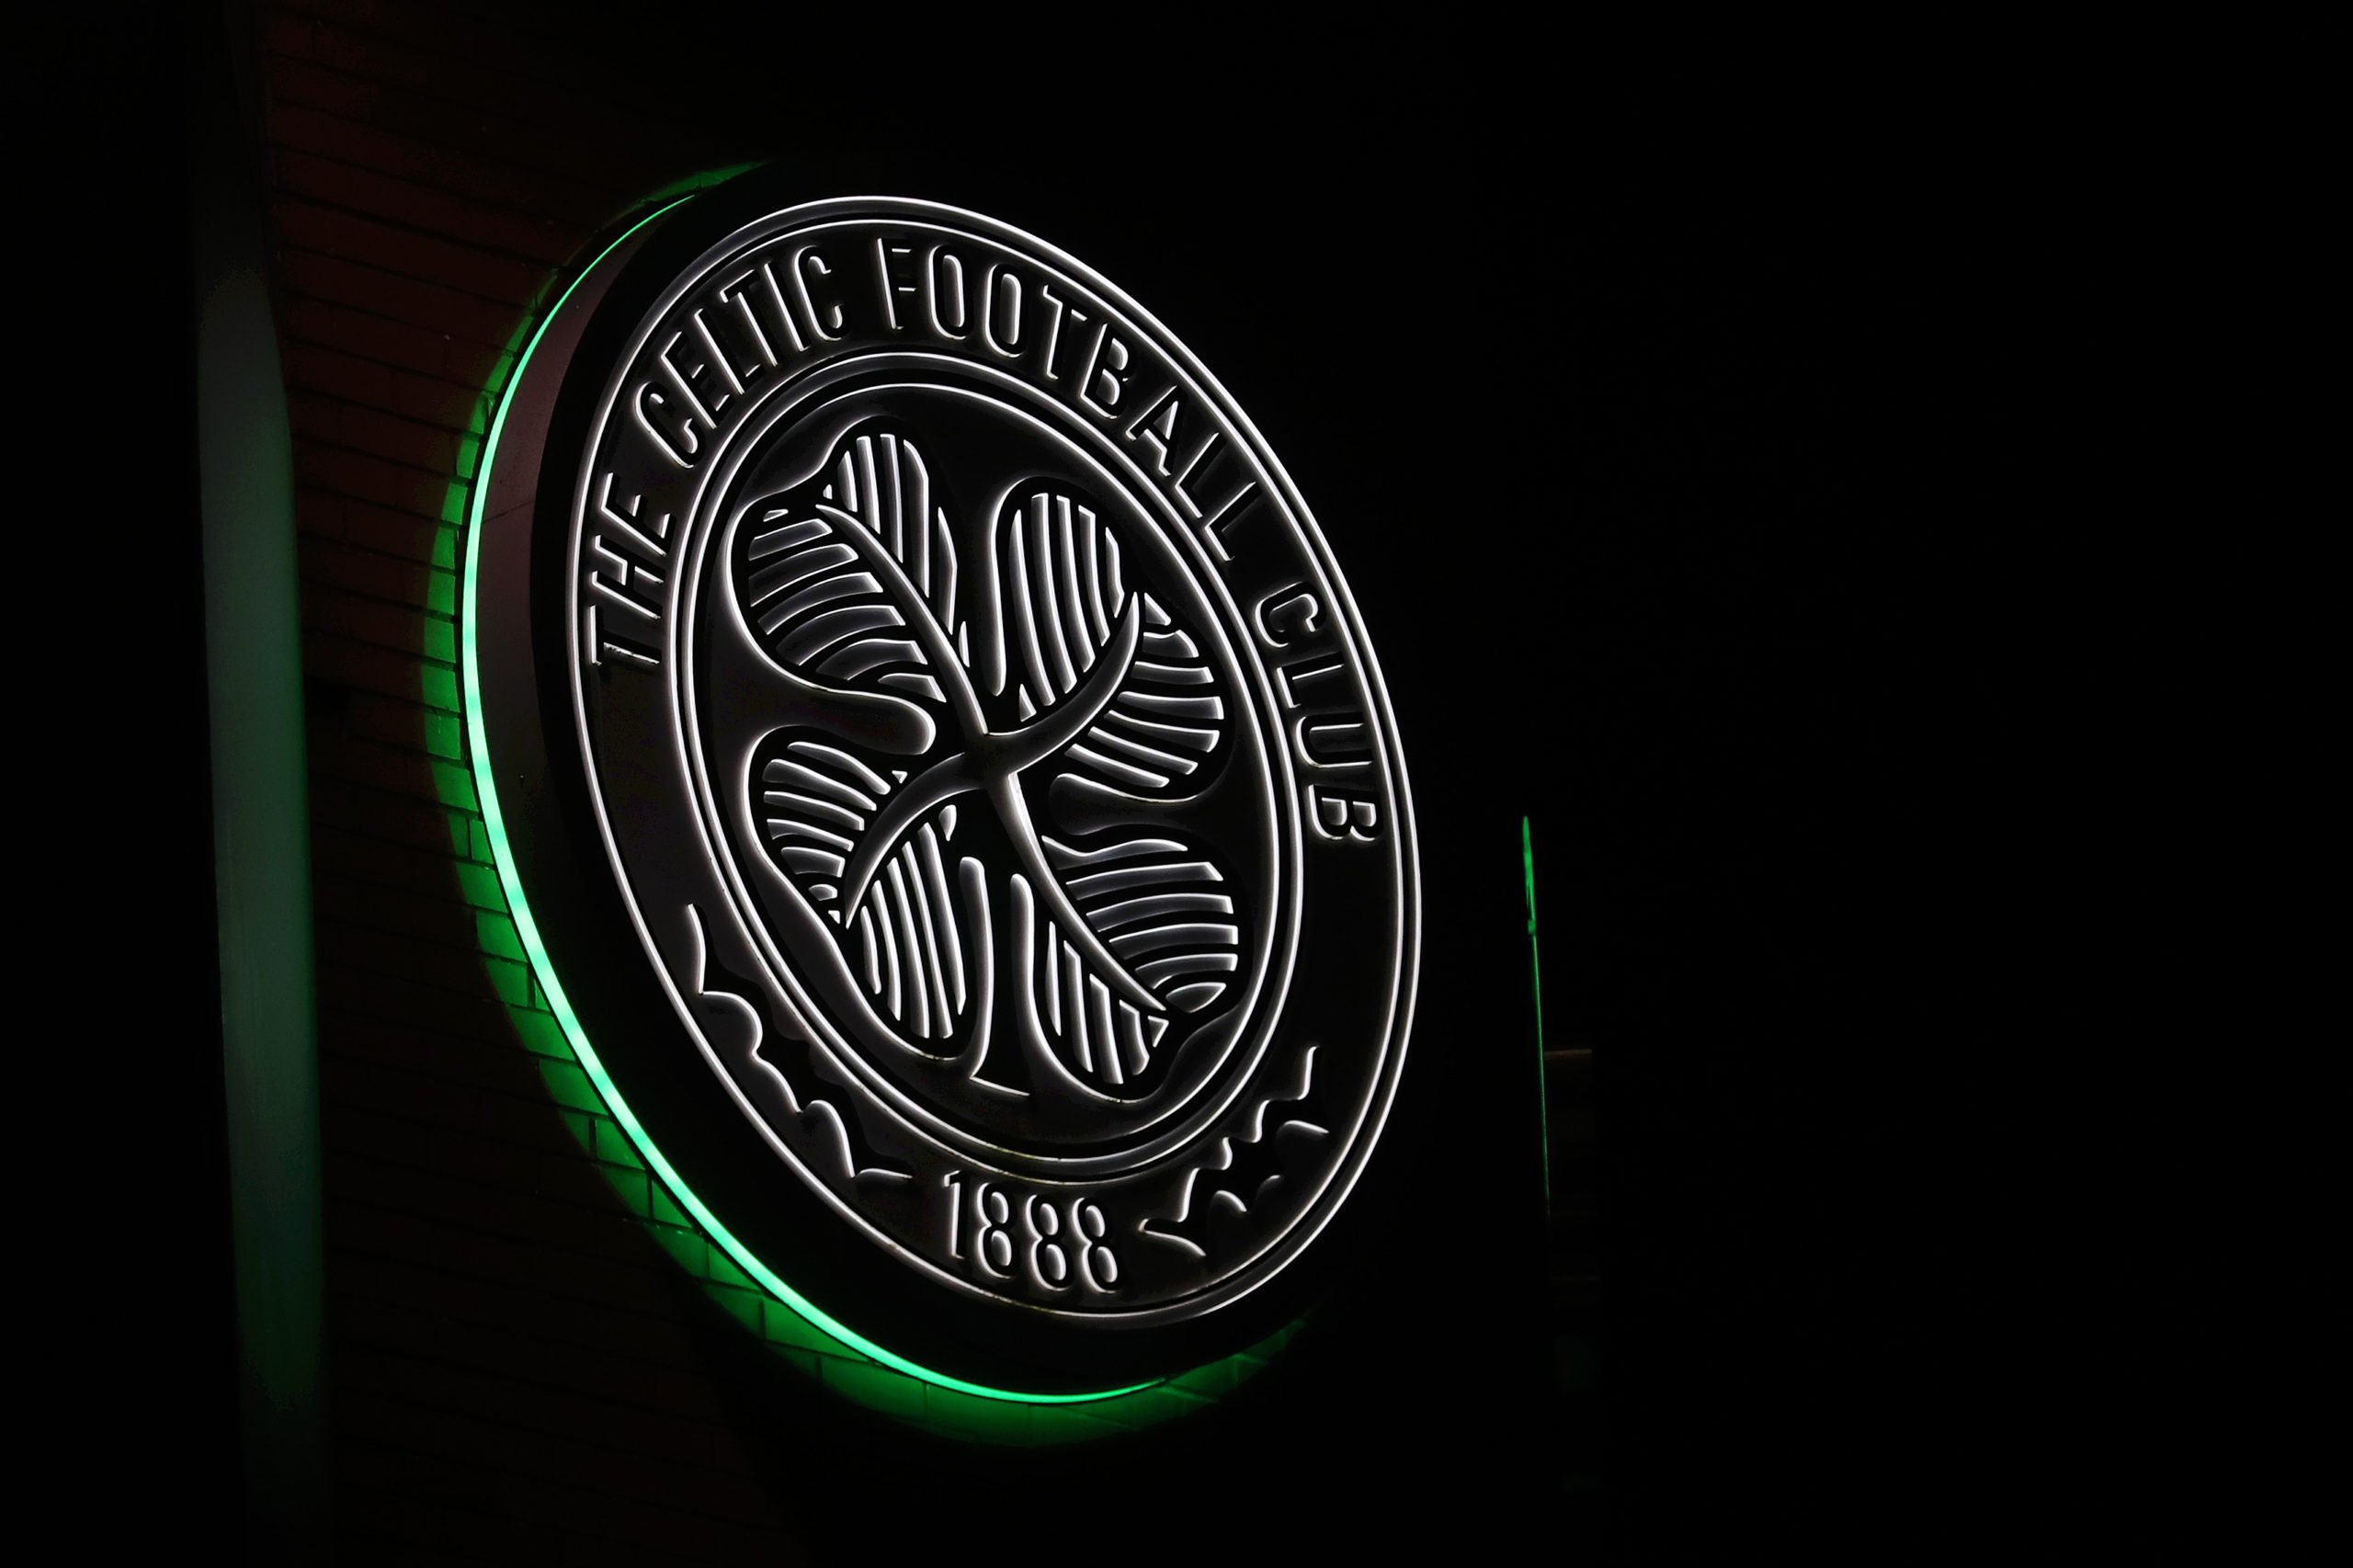 Two post-Europa League Celtic fixtures moved to lunchtime slot